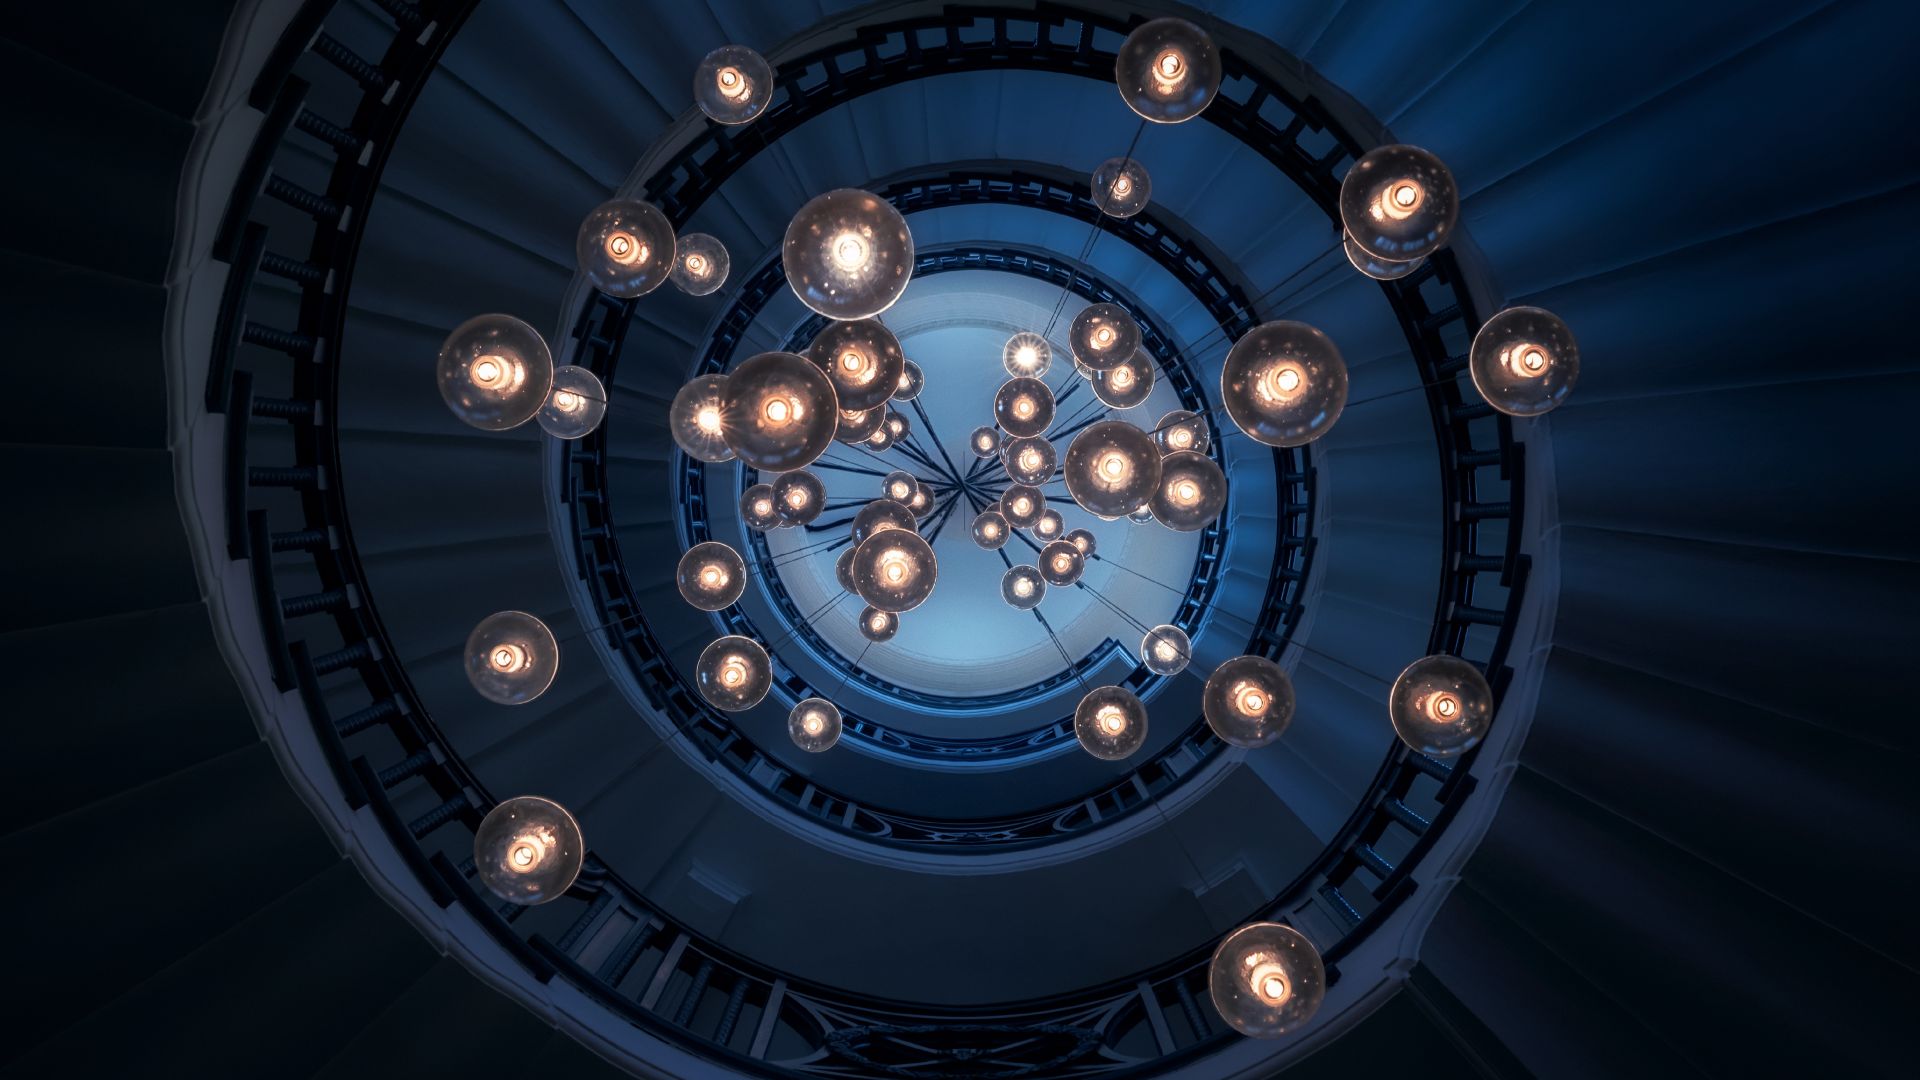 Wallpaper Staircase, lights, ceiling, spiral, architecture, interior, 5k